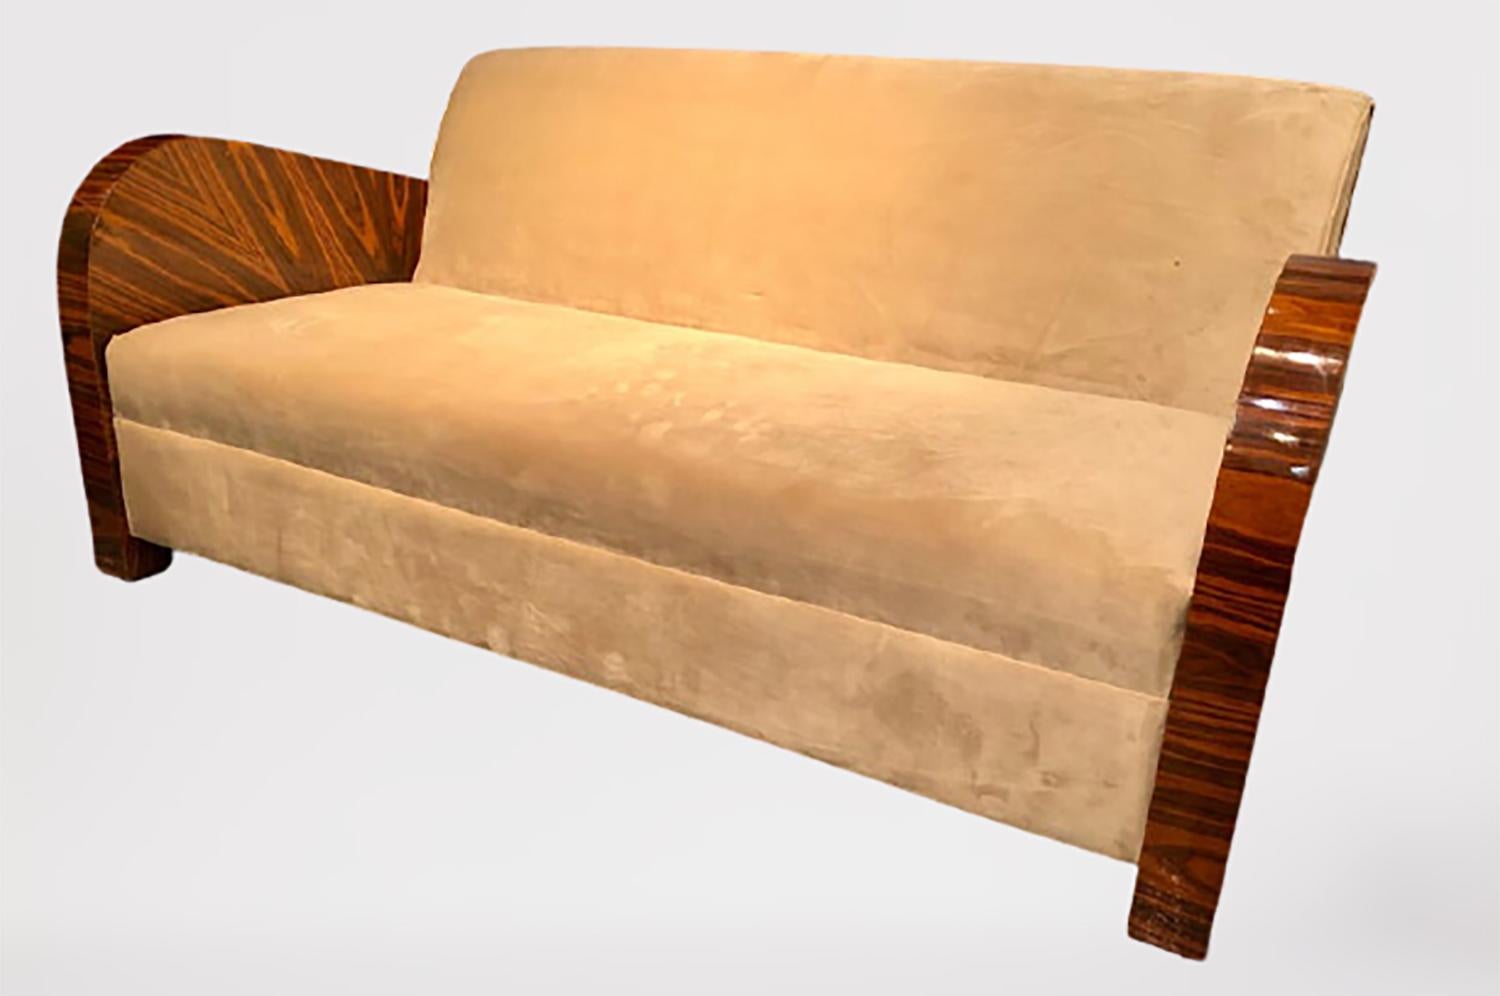 French Art Deco style rosewood sofa/couch having a fine velour upholstery with lacquered rosewood arms. This magnificent sofa or large loveseat is certain to bring charm to any room in the home or office. The large impressive barrel form arm rests